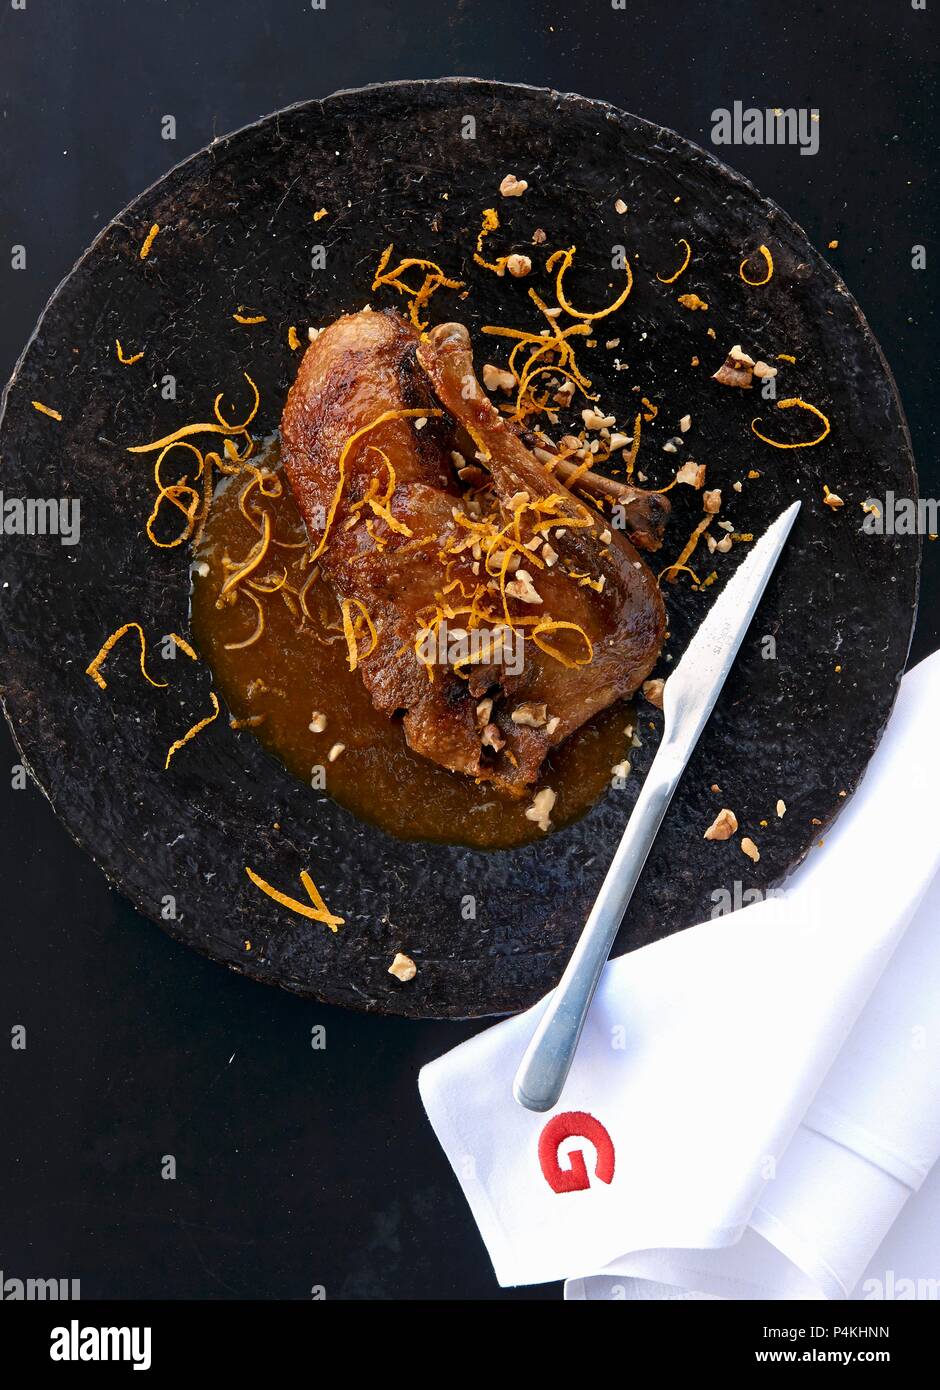 Roasted duck with orange sauce and walnuts Stock Photo